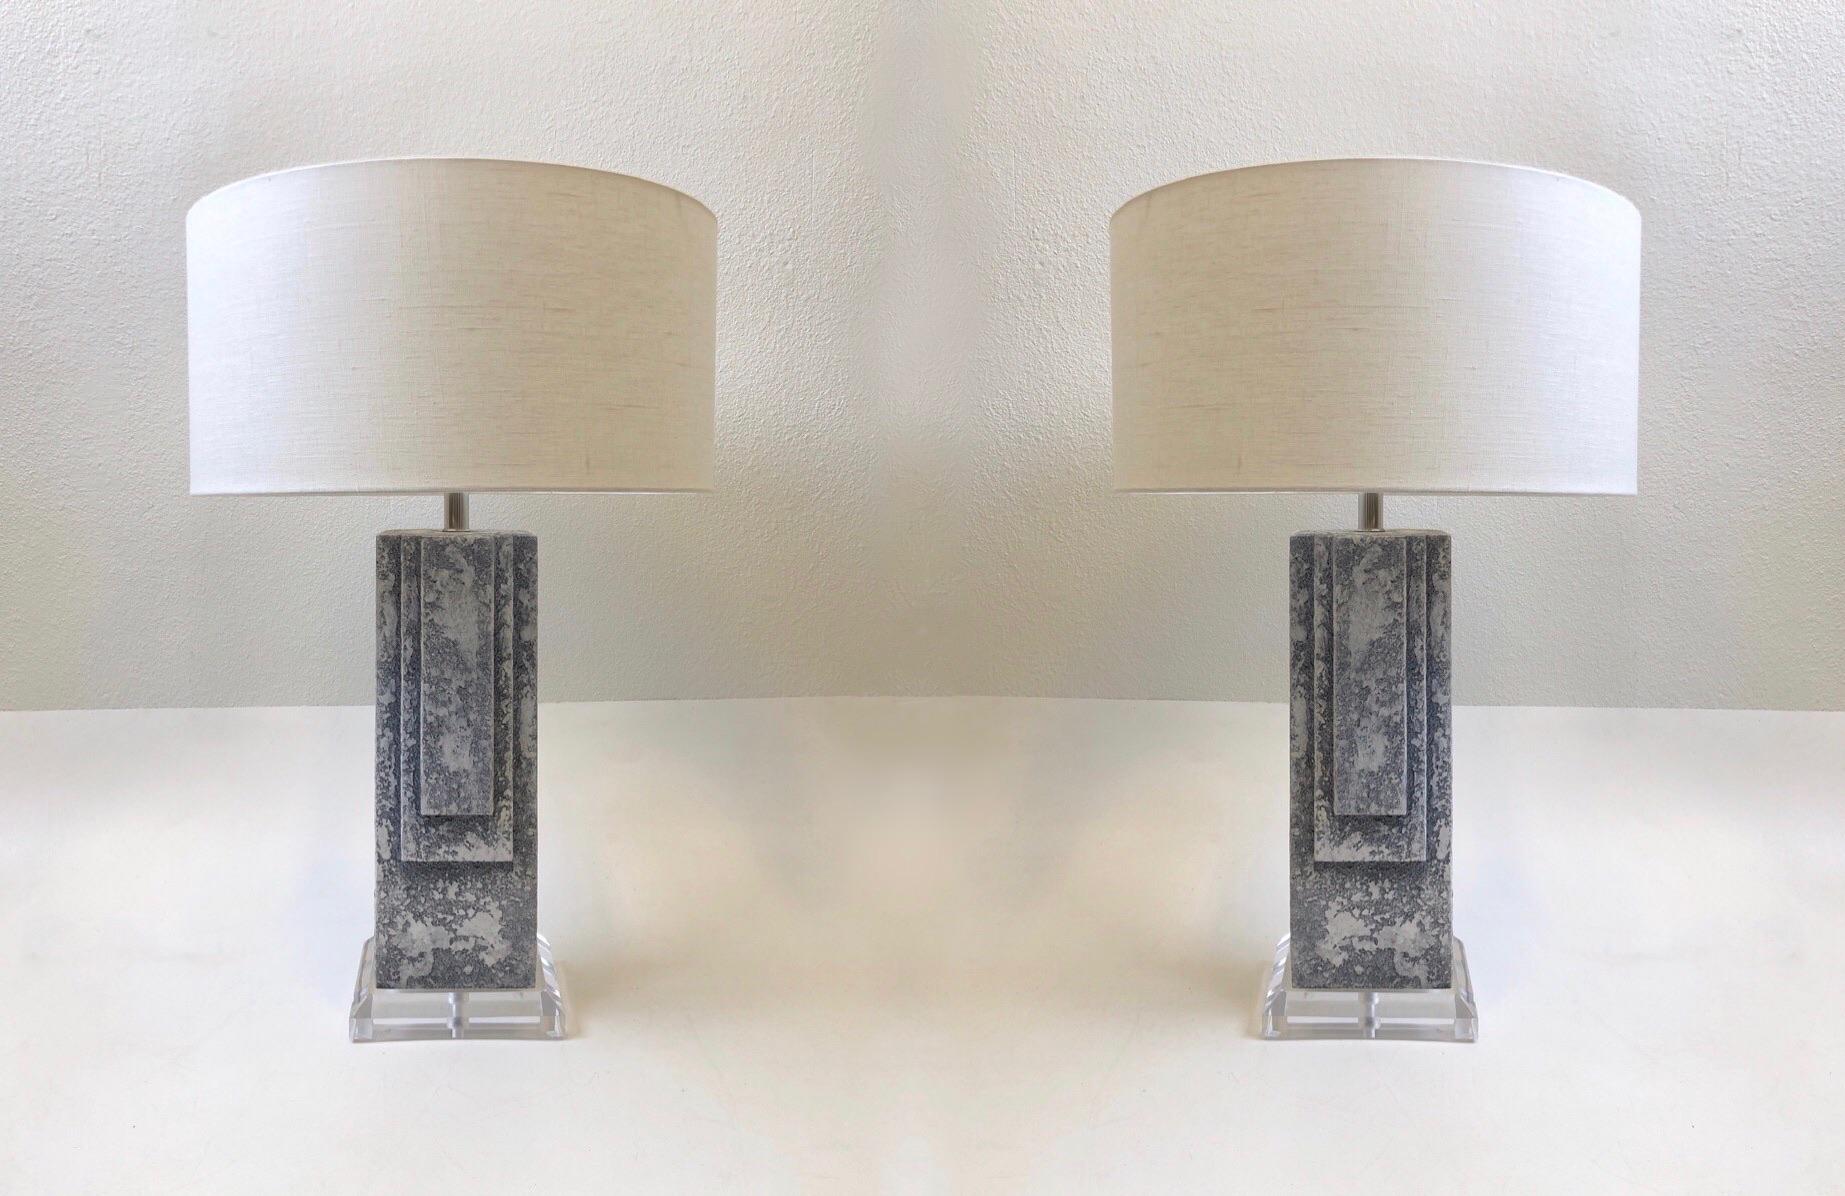 Glamorous 1980s grayish blue plaster table lamps. They are constructed of white plaster with a gray blue wash finish on an acrylic base. Newly rewired with polish chrome hardware and new vanilla linen shades
Measurements: 20” diameter, 30.25”